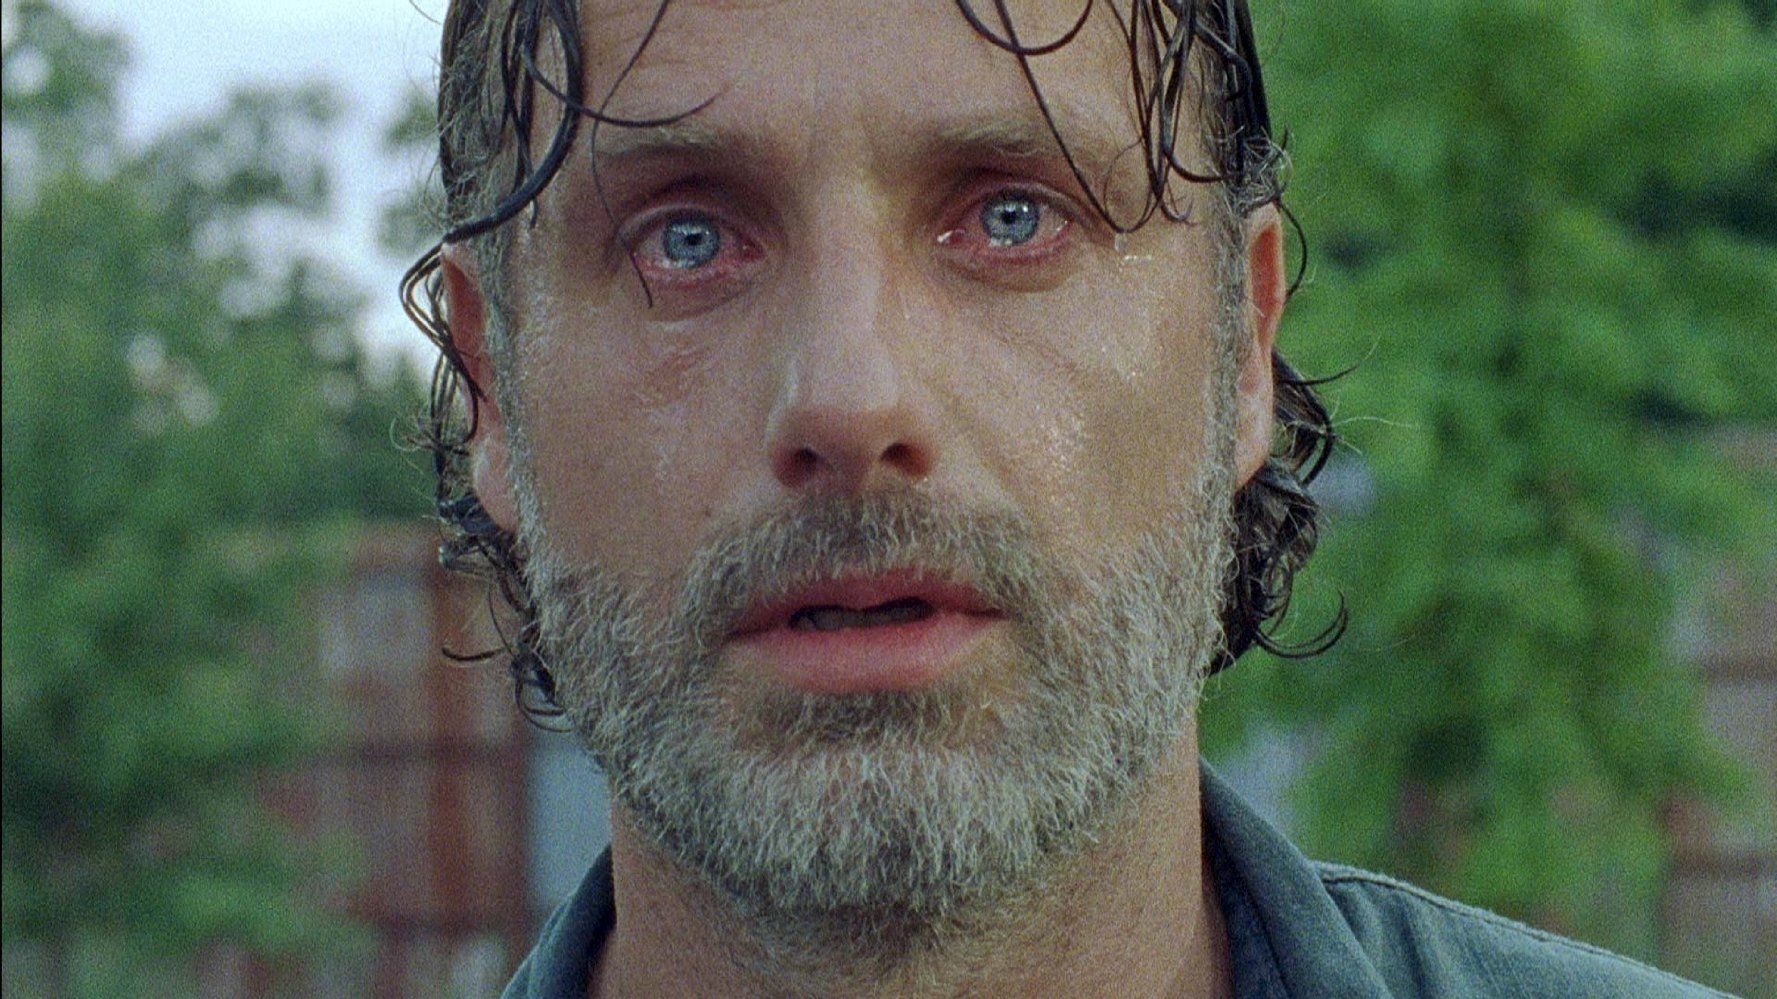 Rick, looking sweaty and disheveled, looks directly into the camera